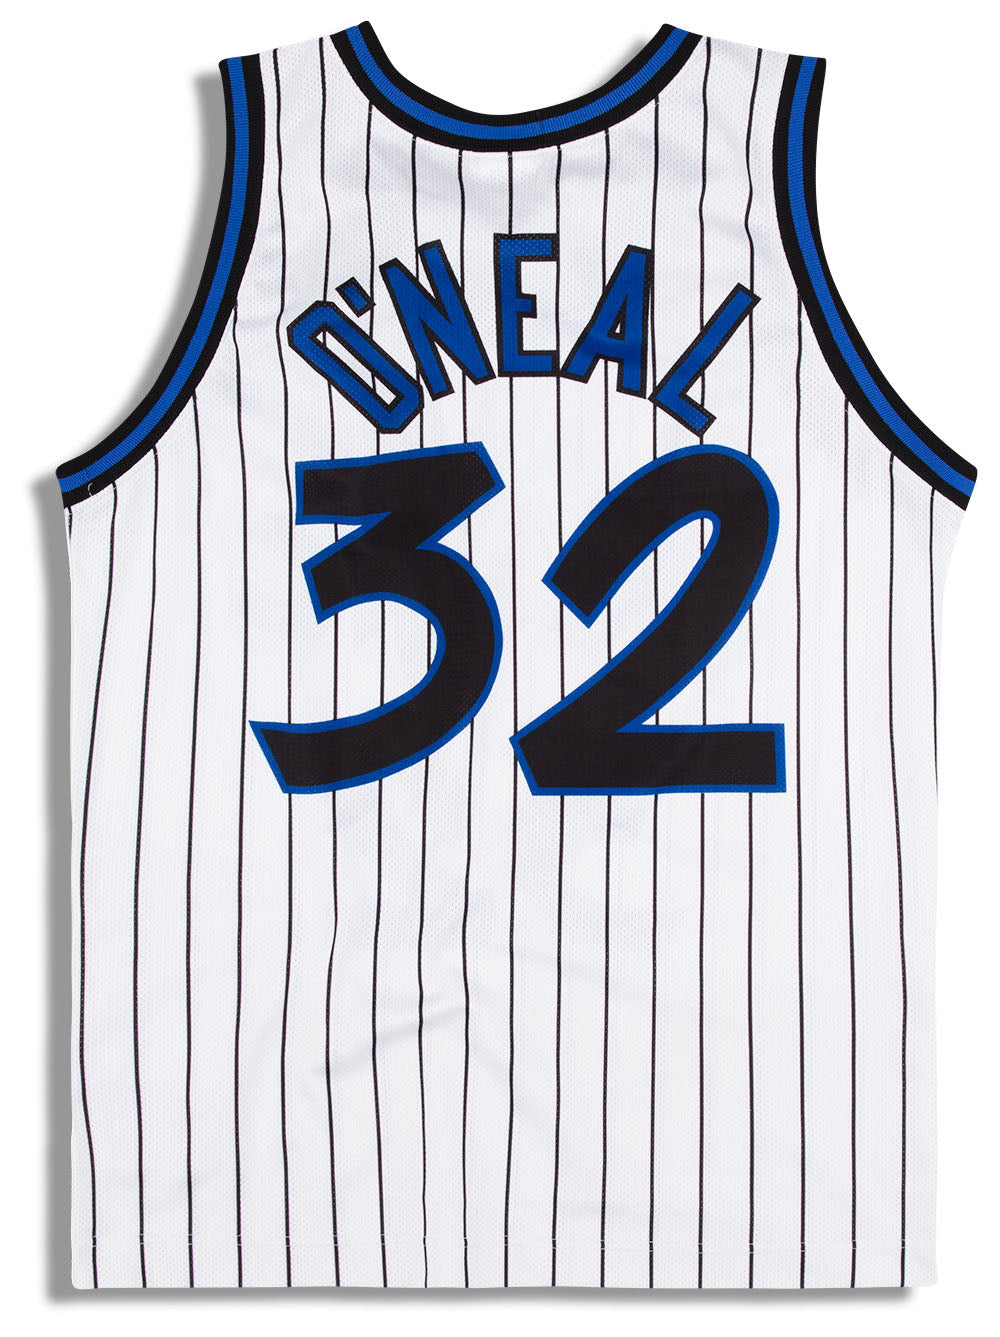 Orlando Magic NBA Basketball Jersey #32 Shaquille O'Neal Vintage Champion  48 BlK,  in 2023